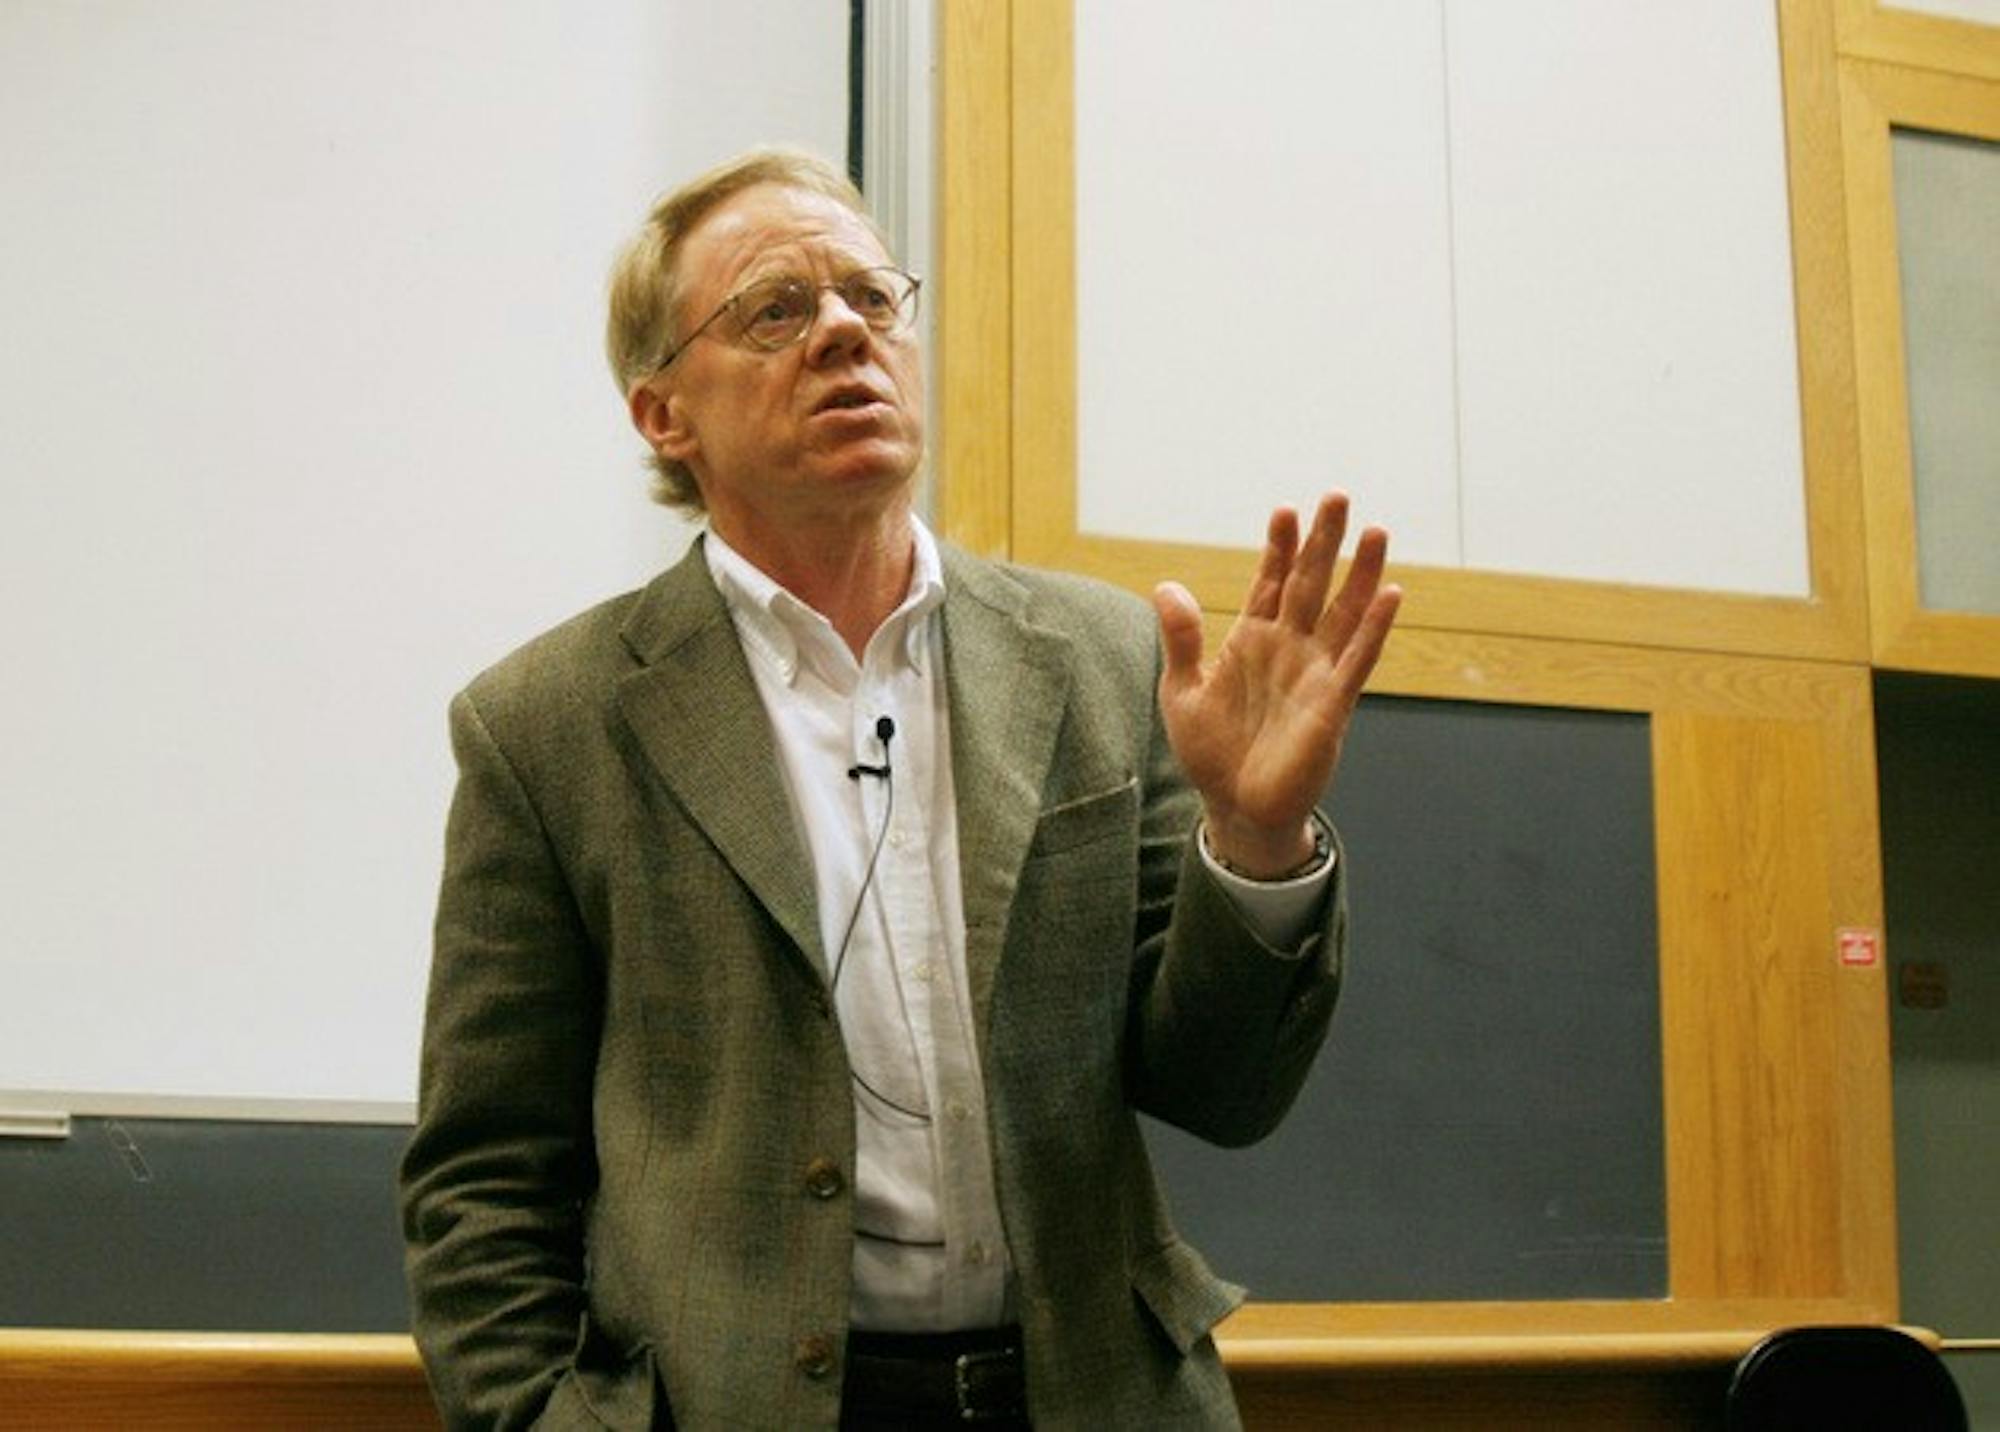 Syracuse University political science professor Jeffrey Stonecash argued Tuesday in a Rockefeller Center lecture that the influence of class in American elections requires a higher degree of academic scrutiny.